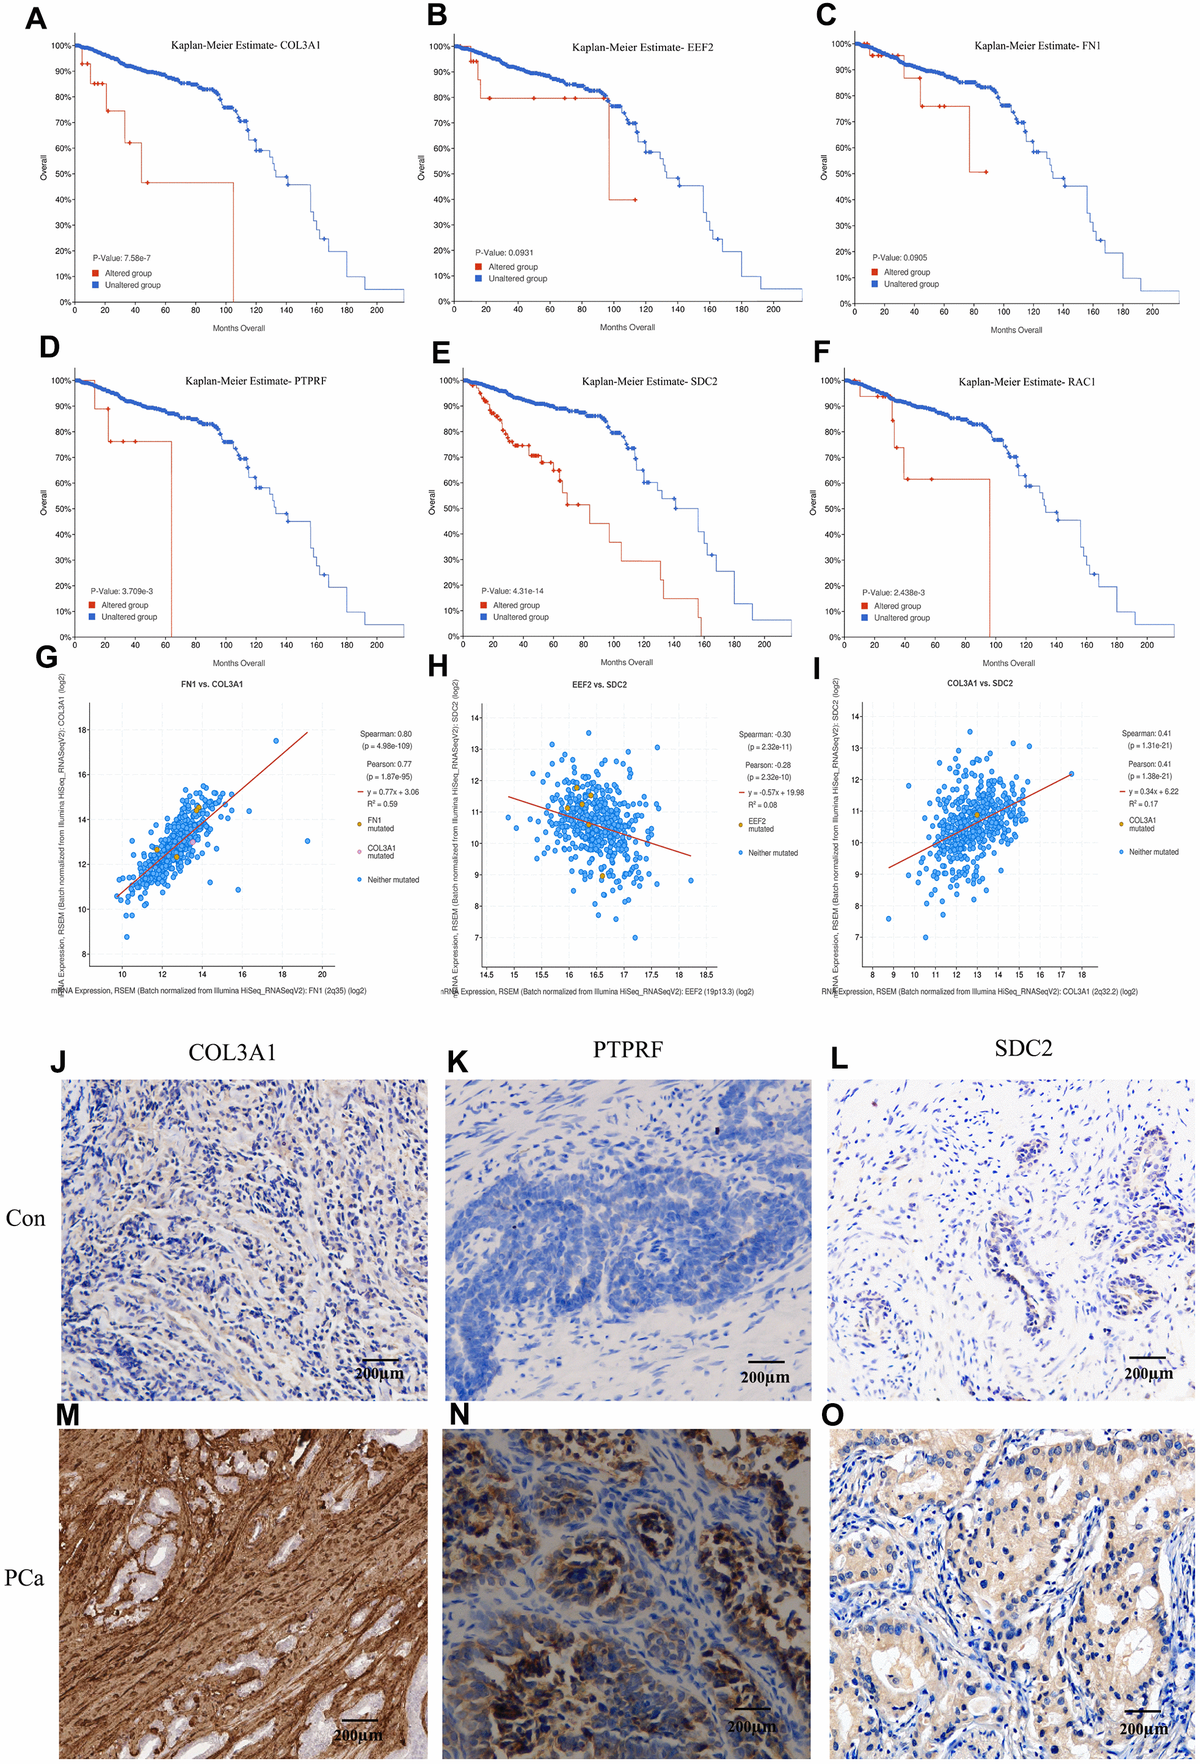 Kaplan-Meier estimation of the overall survival and identification of the key molecules by immunohistochemistry in patients samples. Overall survival analysis of COL3A1 (A), EEF2 (B), FN1 (C), PTPRF (D), SDC2 (E), and RAC1 (F). Expression linear correlations between FN1 vs. COL3A1 (G), EEF2 vs. SDC2 (H), and COL3A1 vs. SDC2 (I). (J–O) Detection of COL3A1, PTPRF, and SDC2 expression by immunohistochemistry in representative BM PCa and controls.